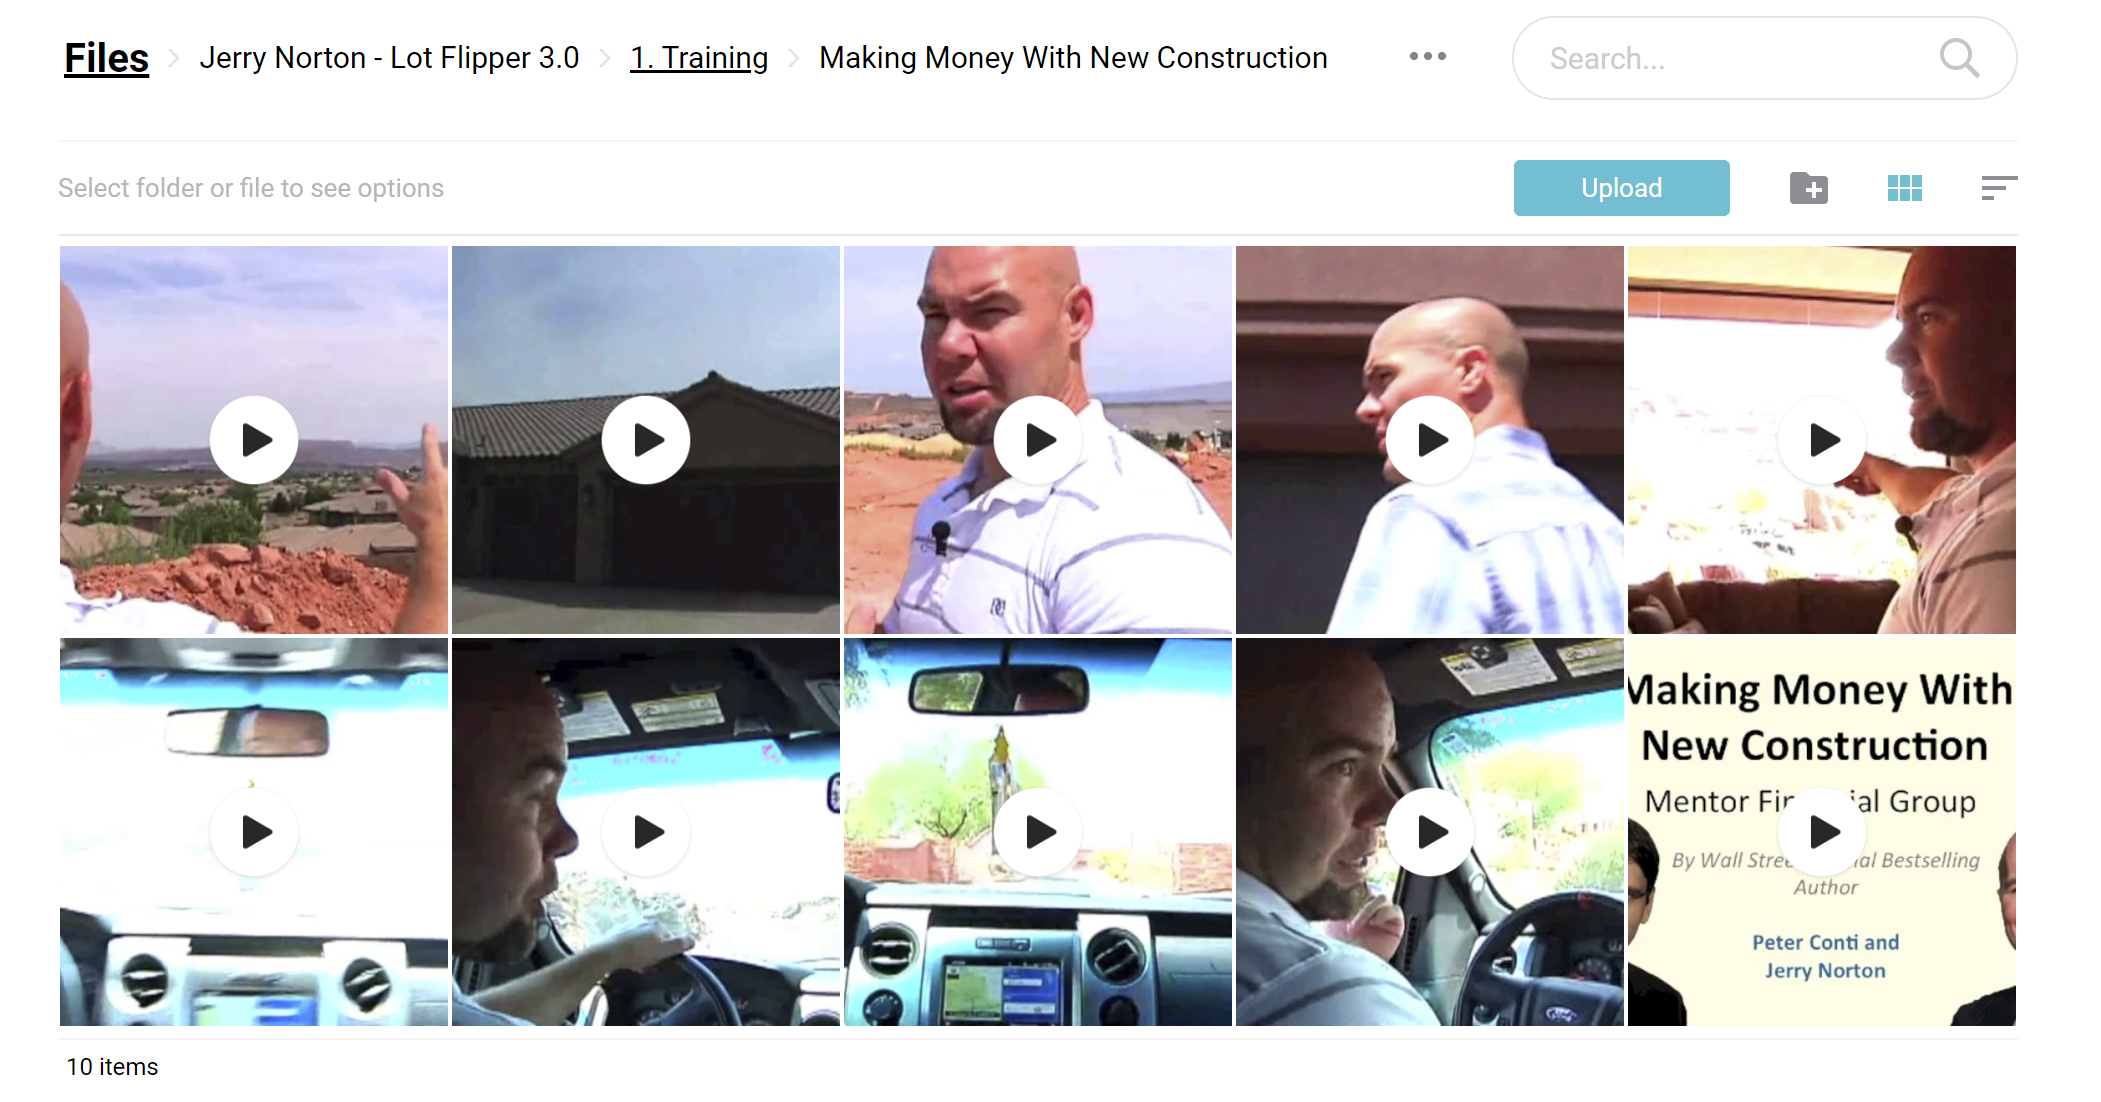 Make Money With New Construction